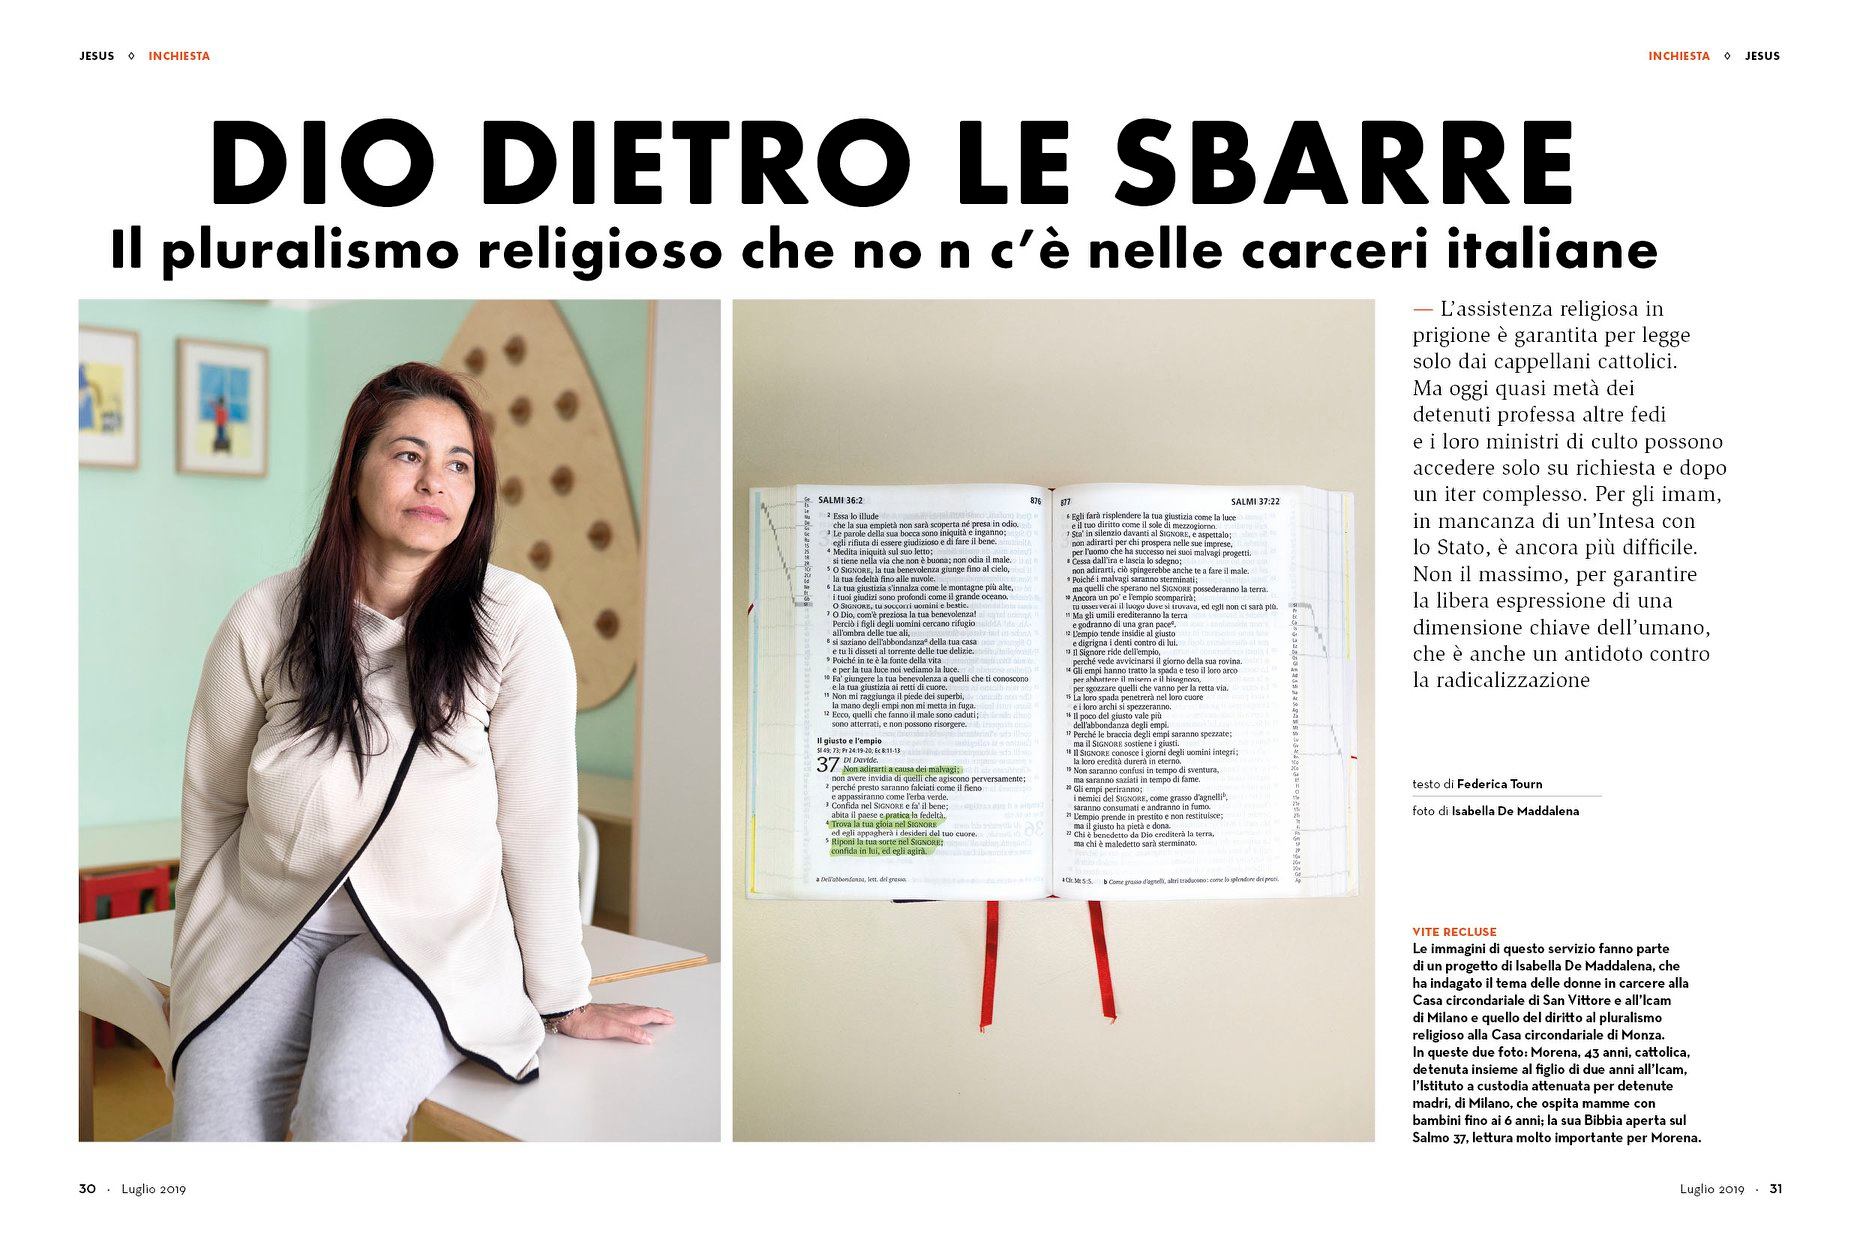 Article titled ”Dio Dietro le Sbarre”